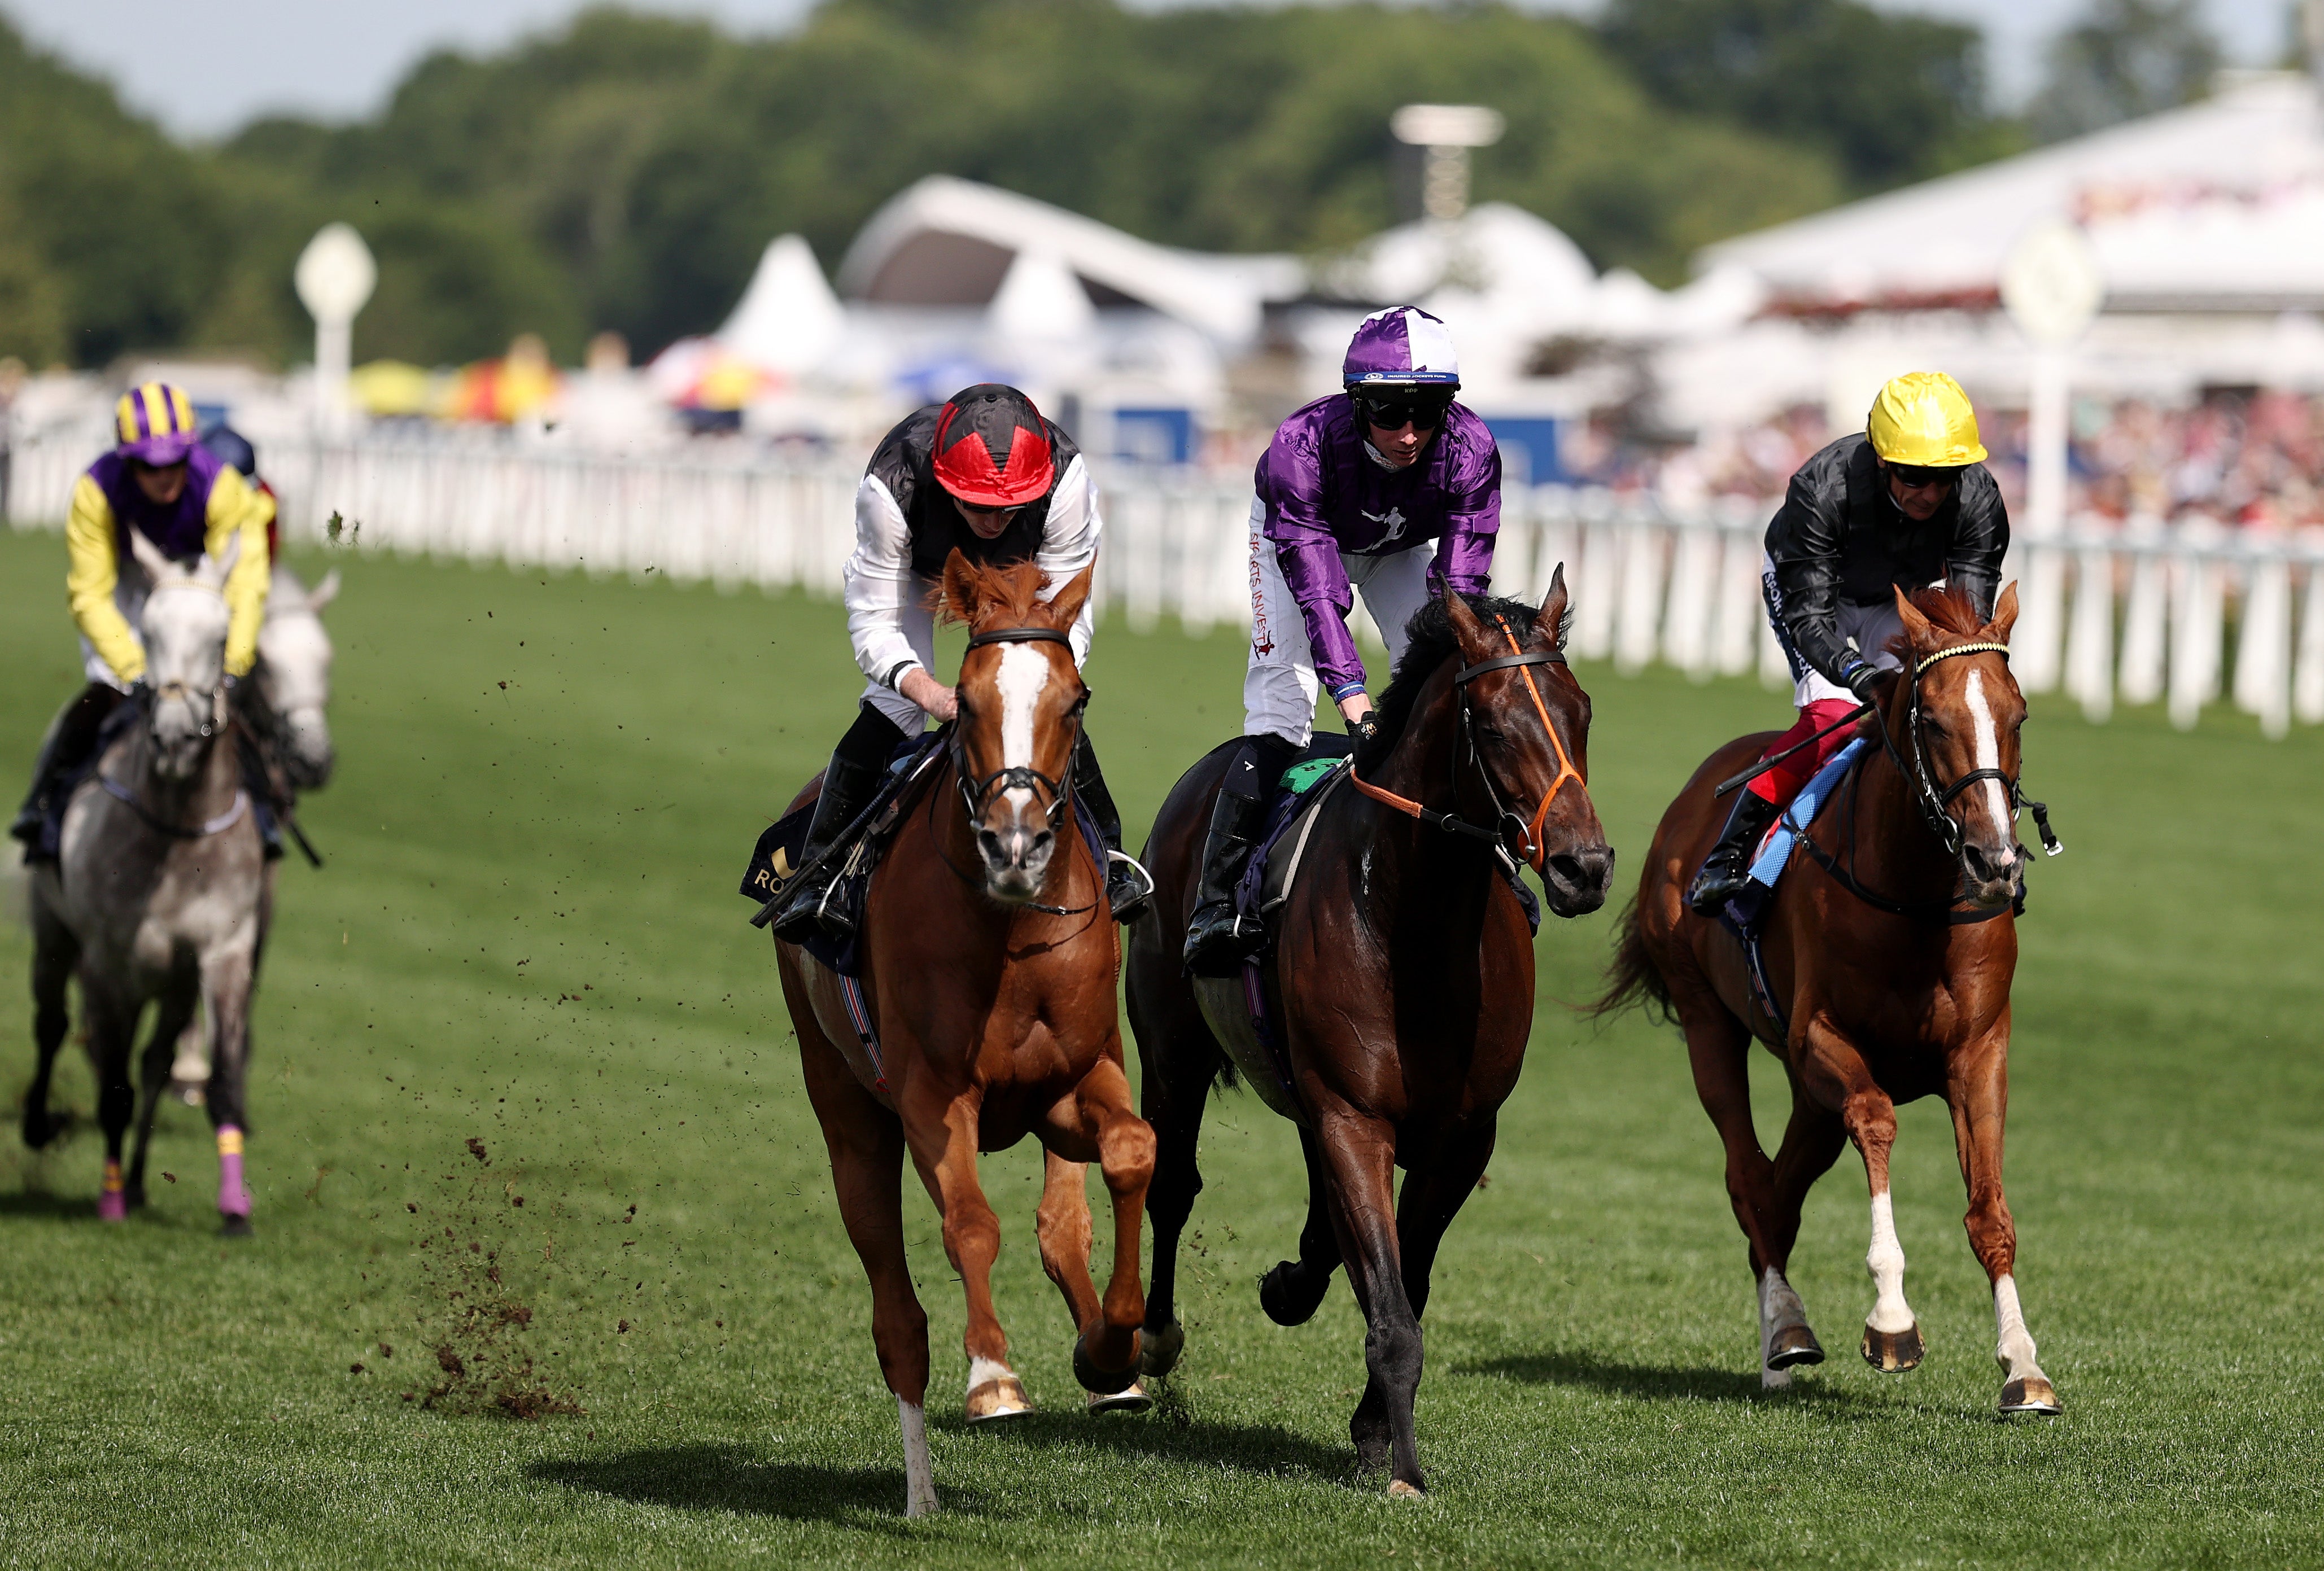 Kyprios (Black + red cap) wins the Gold Cup from Mojo Star (purple) and Stradivarius (black)